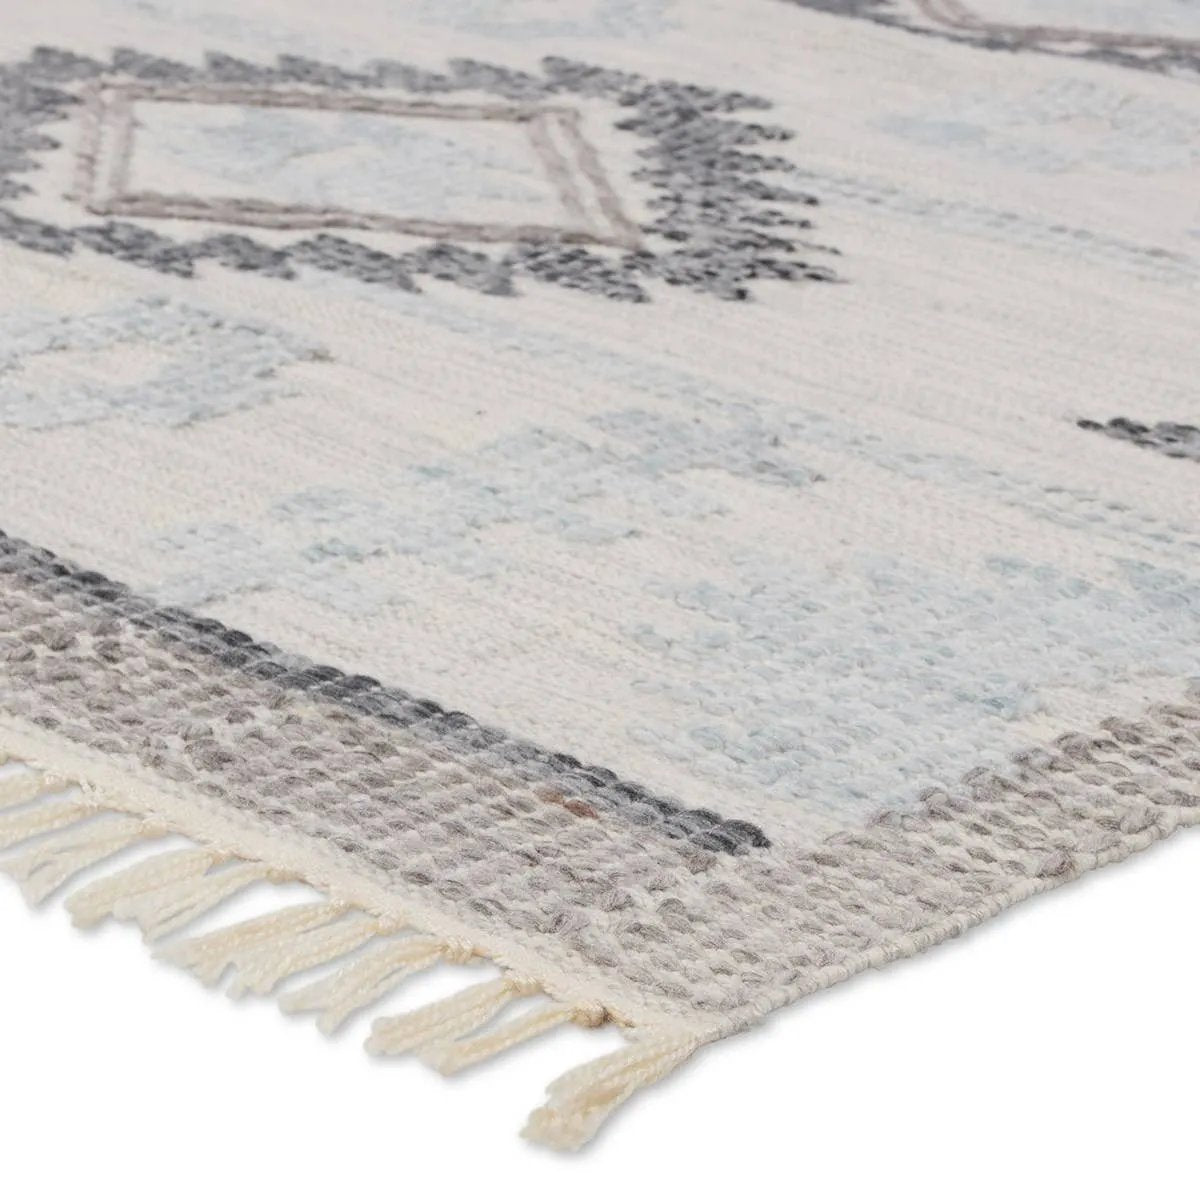 The Revelry collection marries global modernity with durable, performance fibers. The light and airy Winger area rug boasts a captivating geometric medallion in a stunning silver, black, cream, and taupe colorway. Amethyst Home provides interior design, new home construction design consulting, vintage area rugs, and lighting in the Alpharetta metro area.